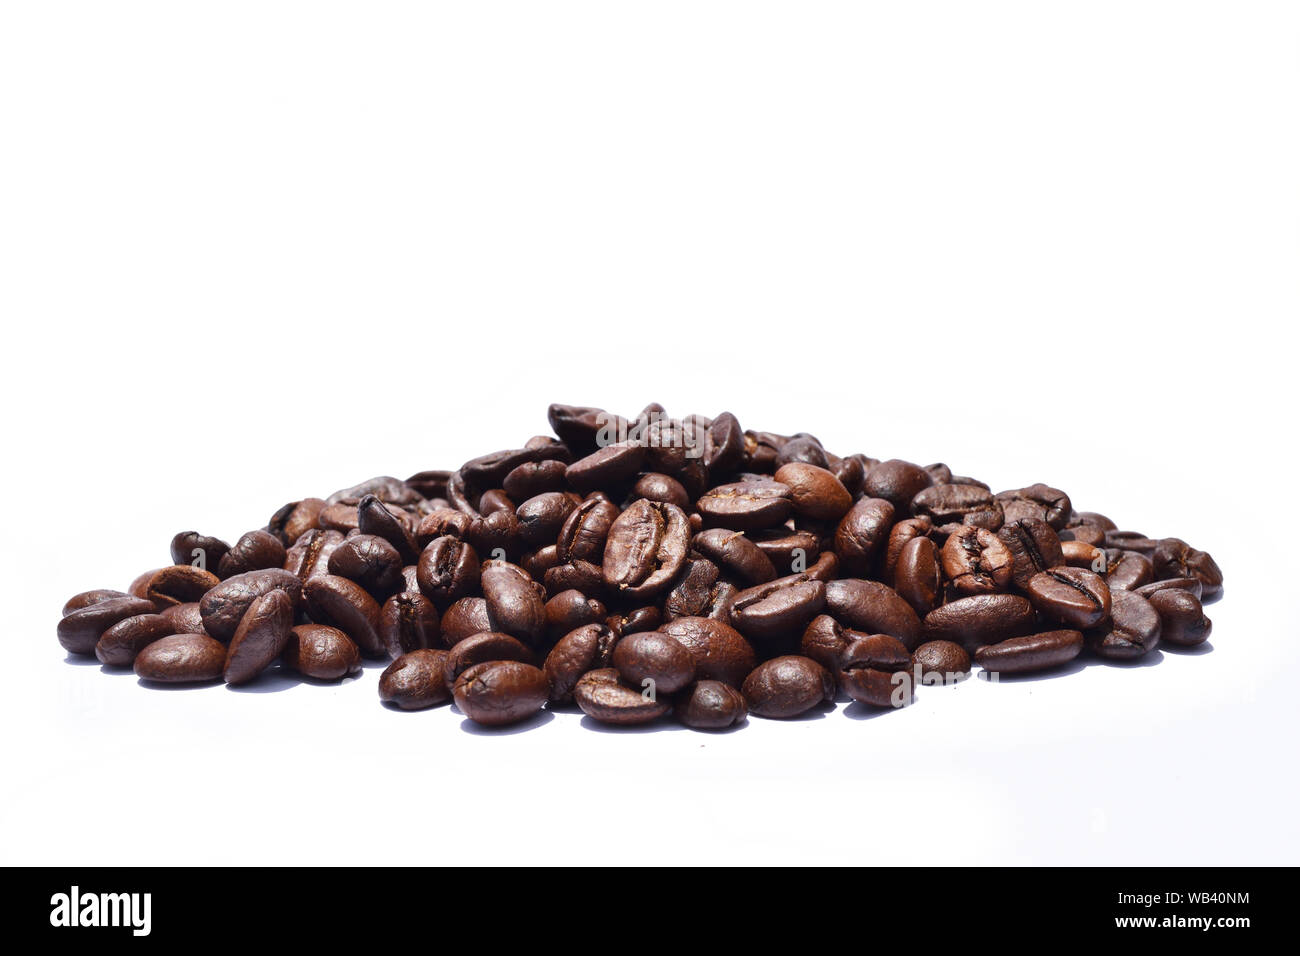 Pile of Dark brown roasted coffee beans isolated on white background, Raw processed food for drinks refreshment Stock Photo